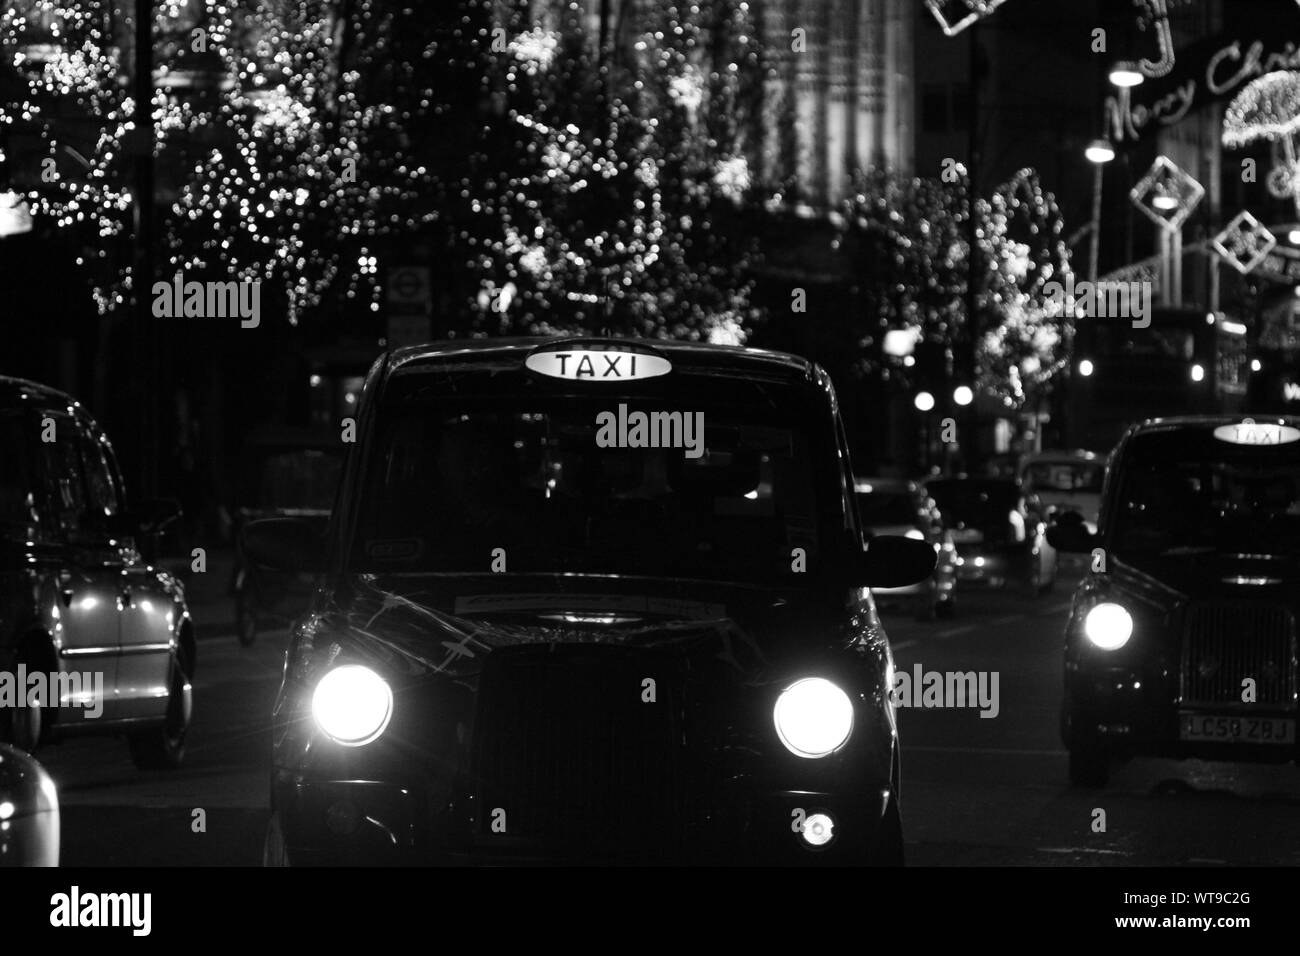 AUTHENTIC BLACK AND WHITE  IMAGE OF LONDON TAXI CABS WORKING IN OXFORD STREET, LONDON AT NIGHT OVER THE CHRISTMAS HOLIDAY PERIOD. CHRISTMAS DECORATIVE STREET LIGHTS ALONG THE STREET. MONOCHROME IMAGES. STREET LIFE. CITY LIFE. URBAN SCENE AT NIGHT. CHRITMAS. Stock Photo